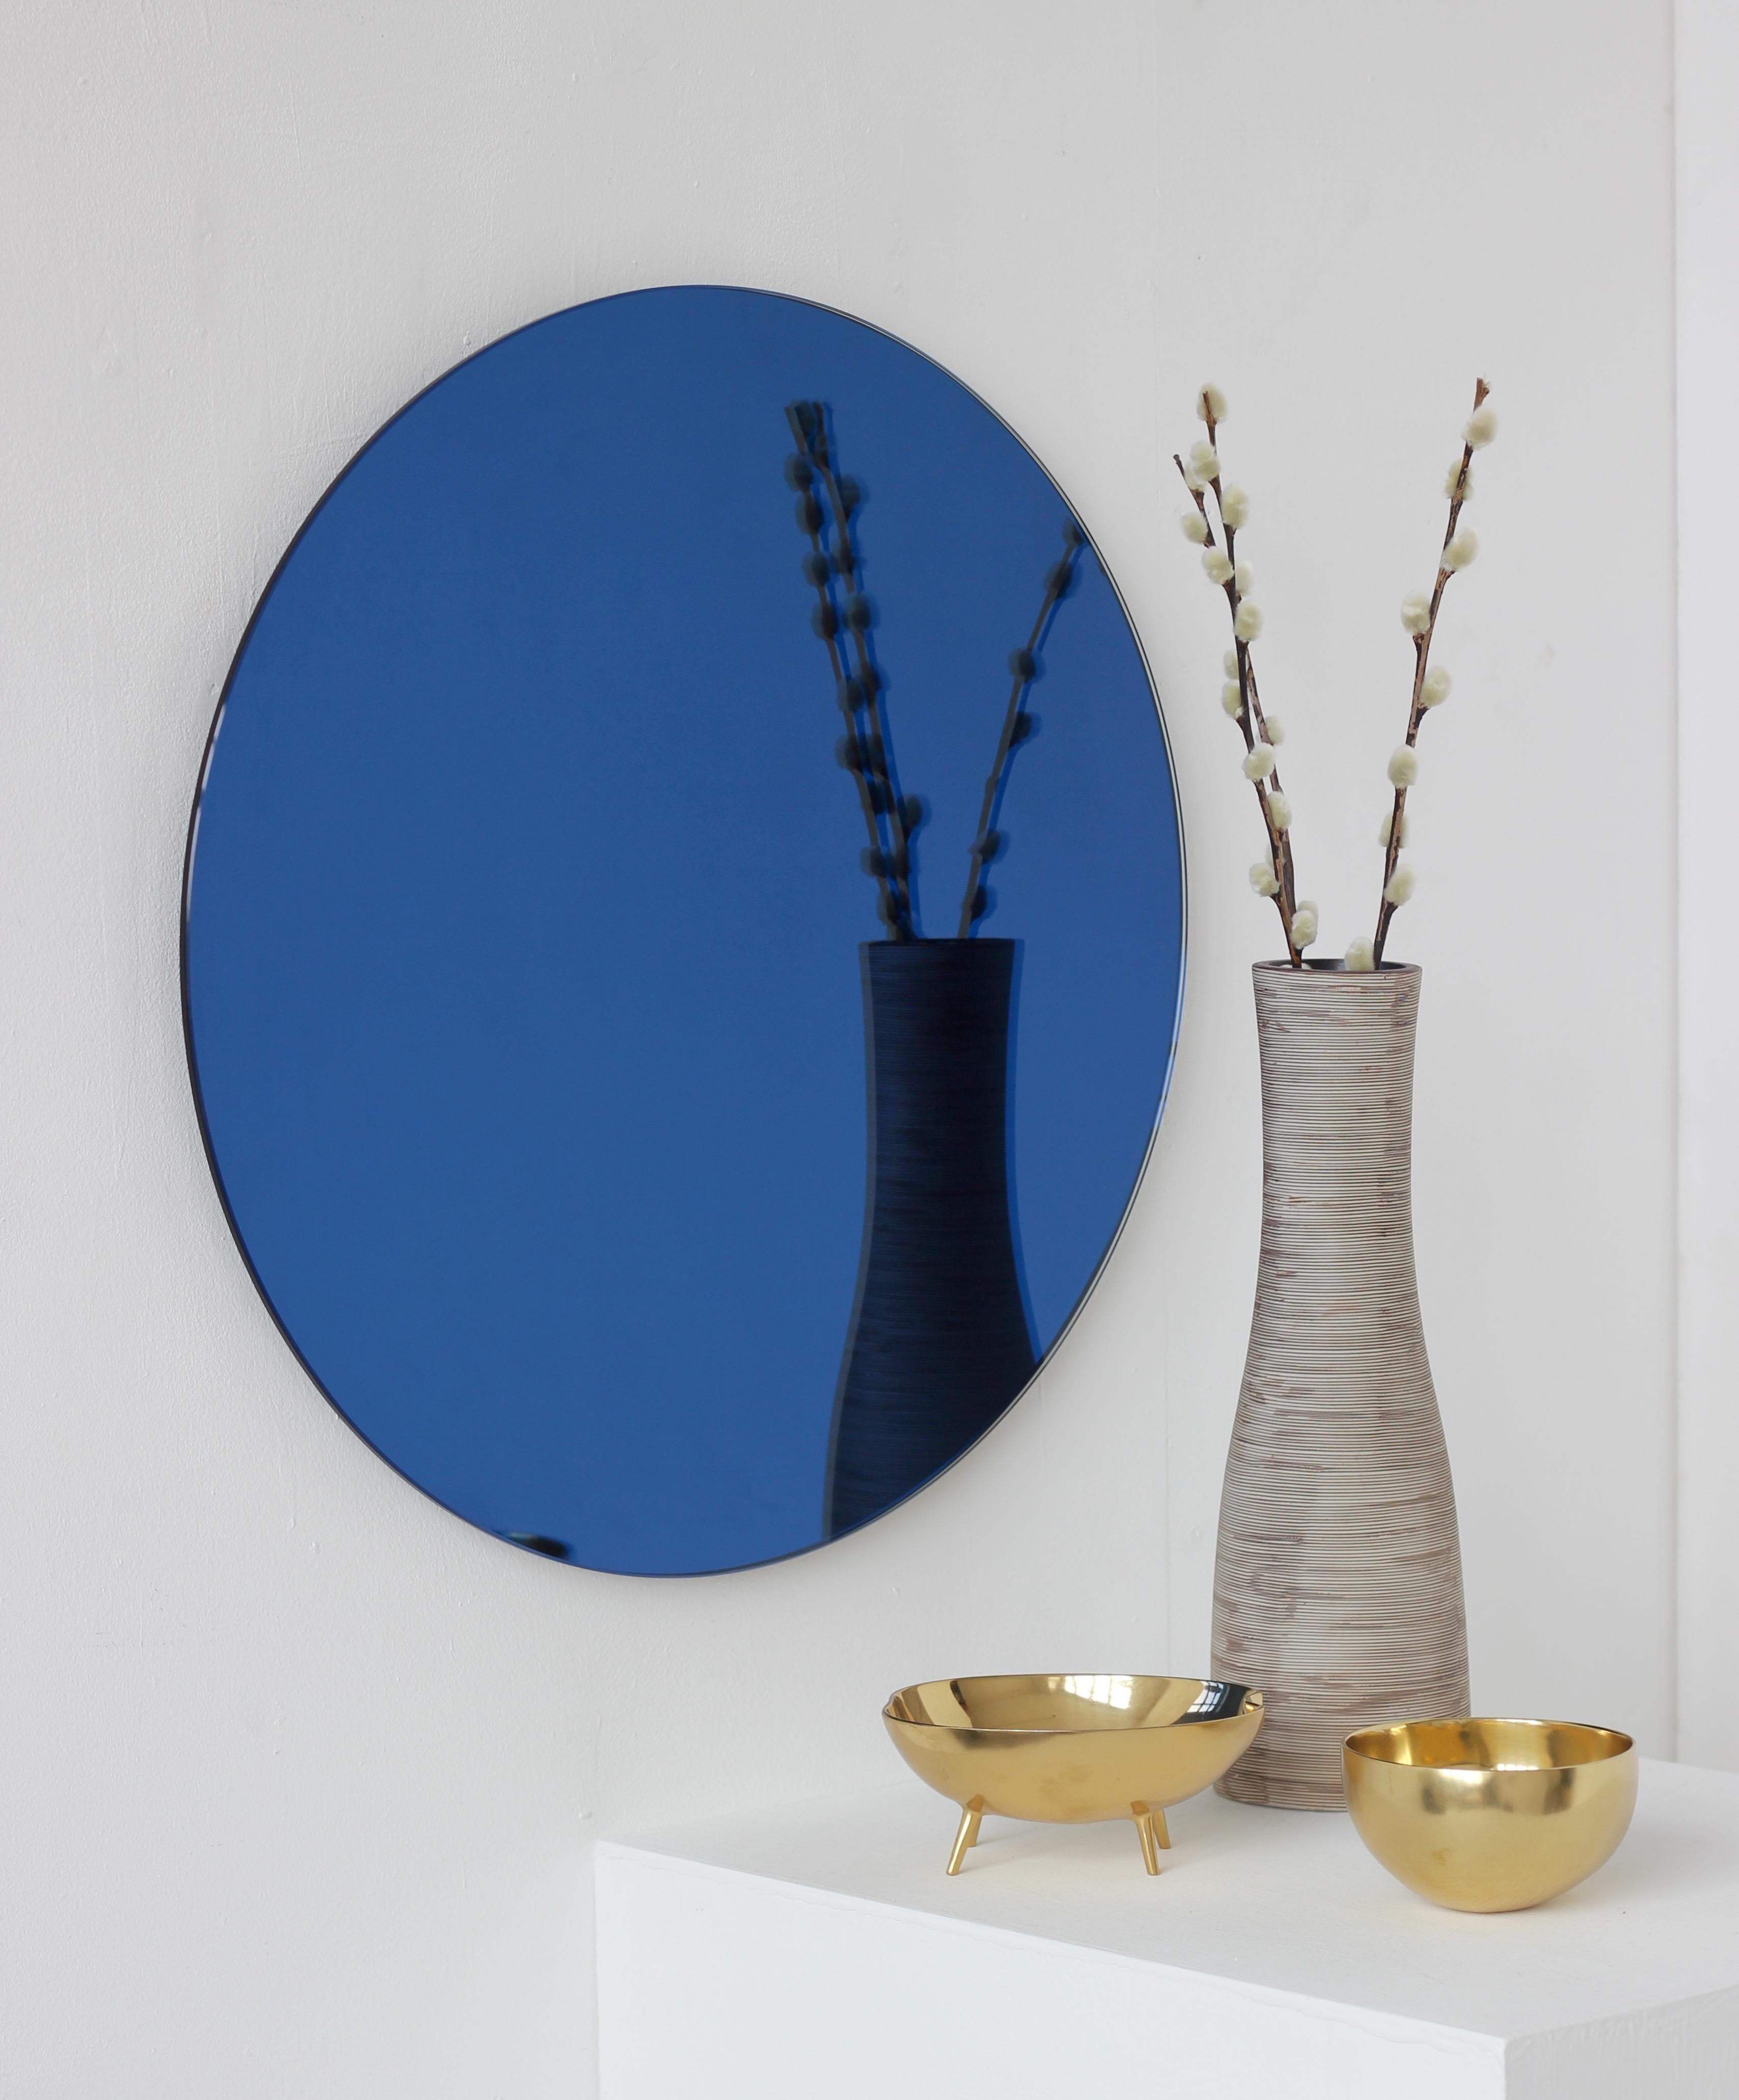 Charming and minimalist blue tinted round frameless mirror with a floating effect. Quality design that ensures the mirror sits perfectly parallel to the wall. Designed and made in London, UK.

Fitted with professional plates not visible once